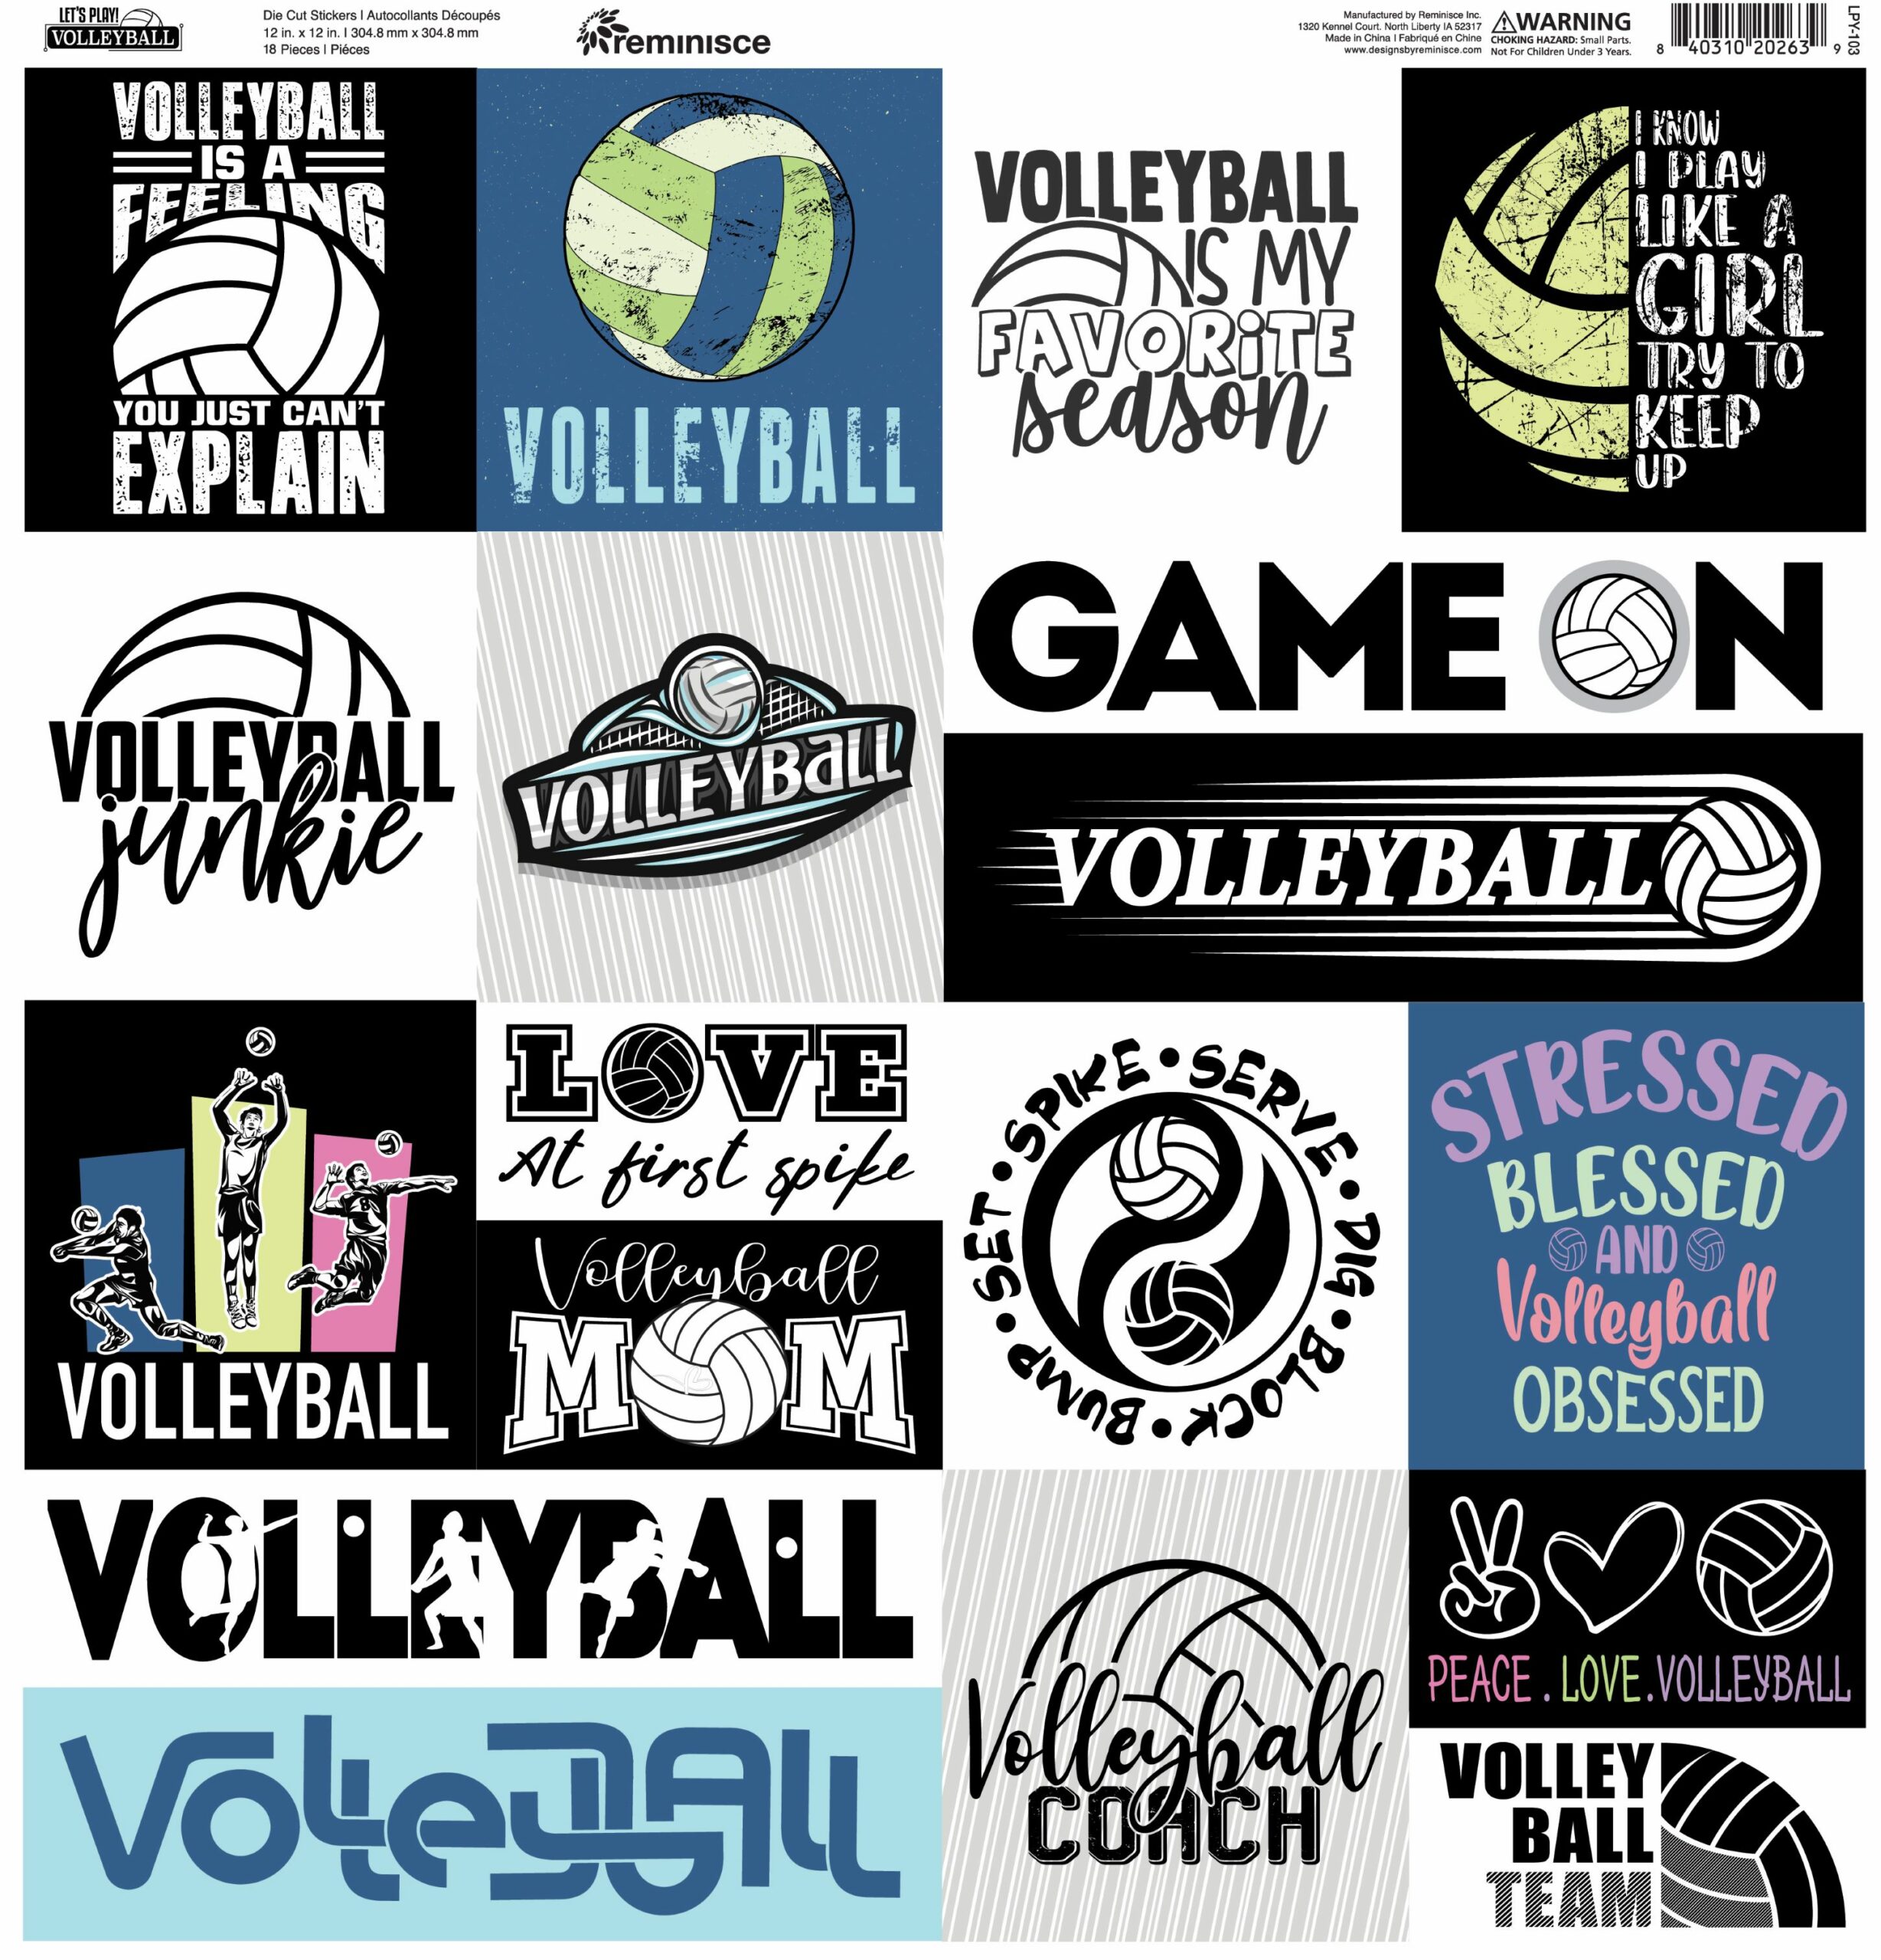 Reminicse Let’s Play Volleyball Sticker